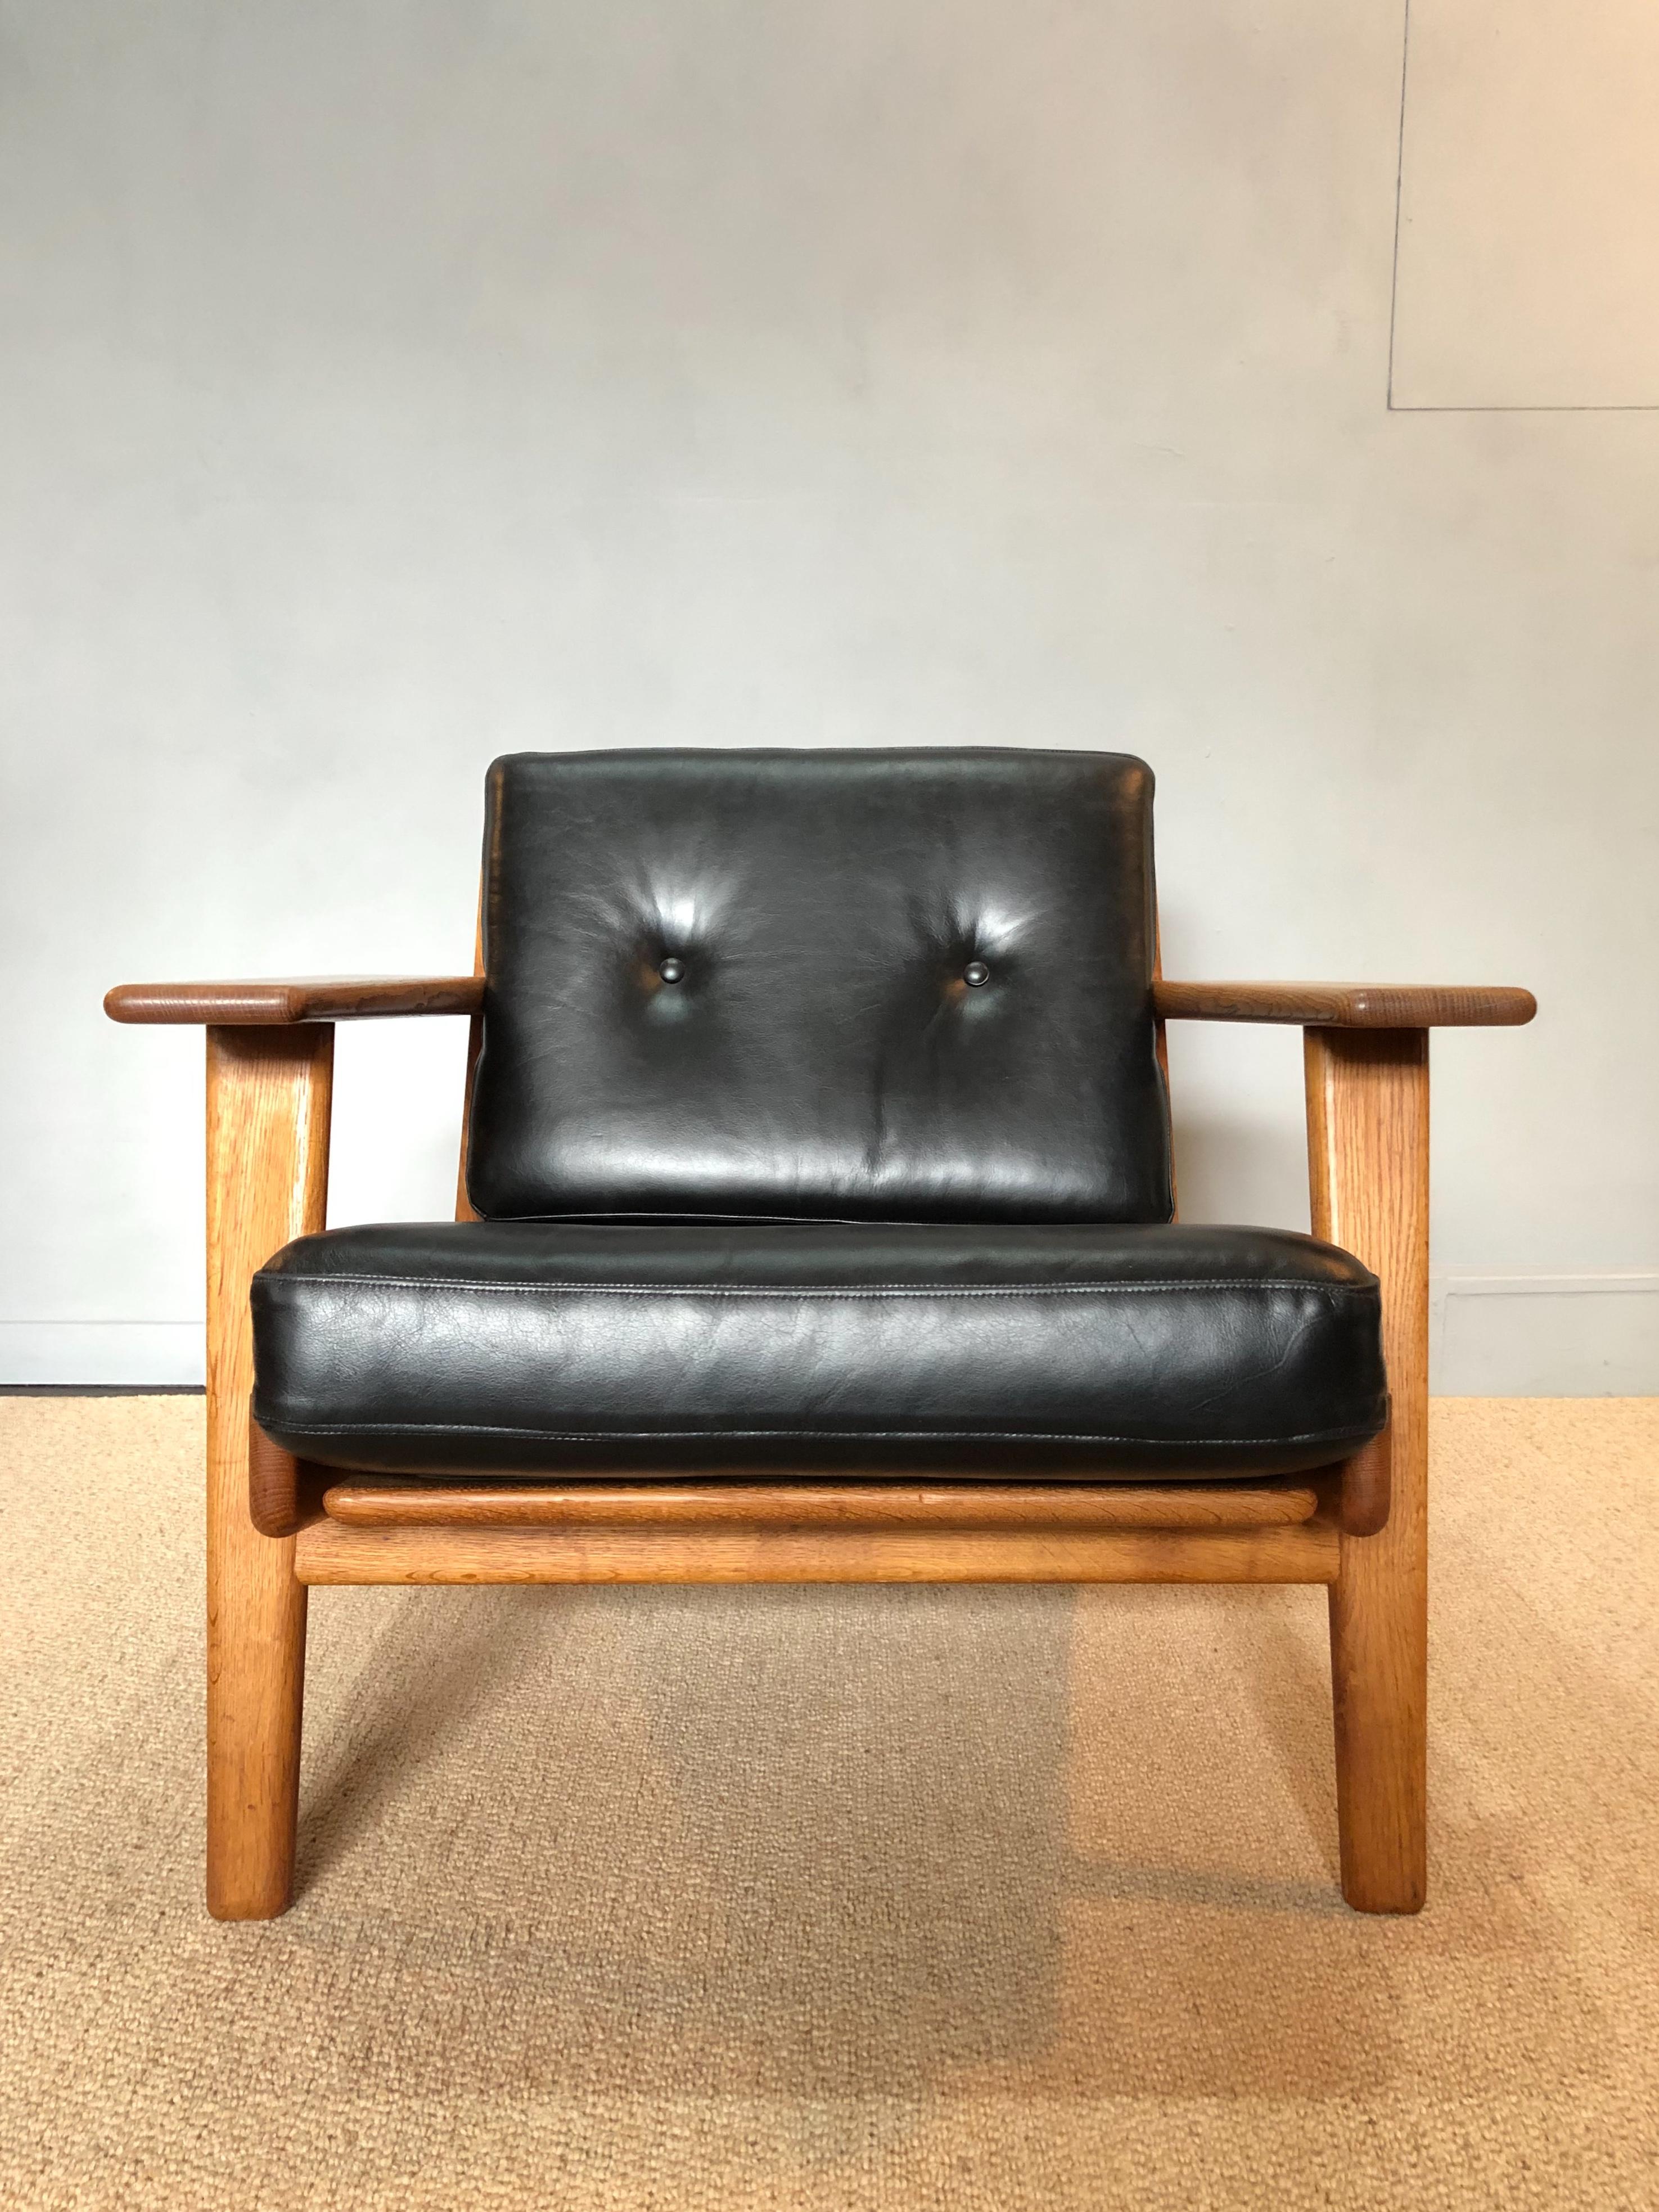 Original 1950s GETAMA ge290 lounge chairs by Hans J Wegner. These chairs have been fully reupholstered in a jet black leather sympathetic to its heritage. European oak frames have been cleaned and re-oiled. Original metal sprung cushions. Original